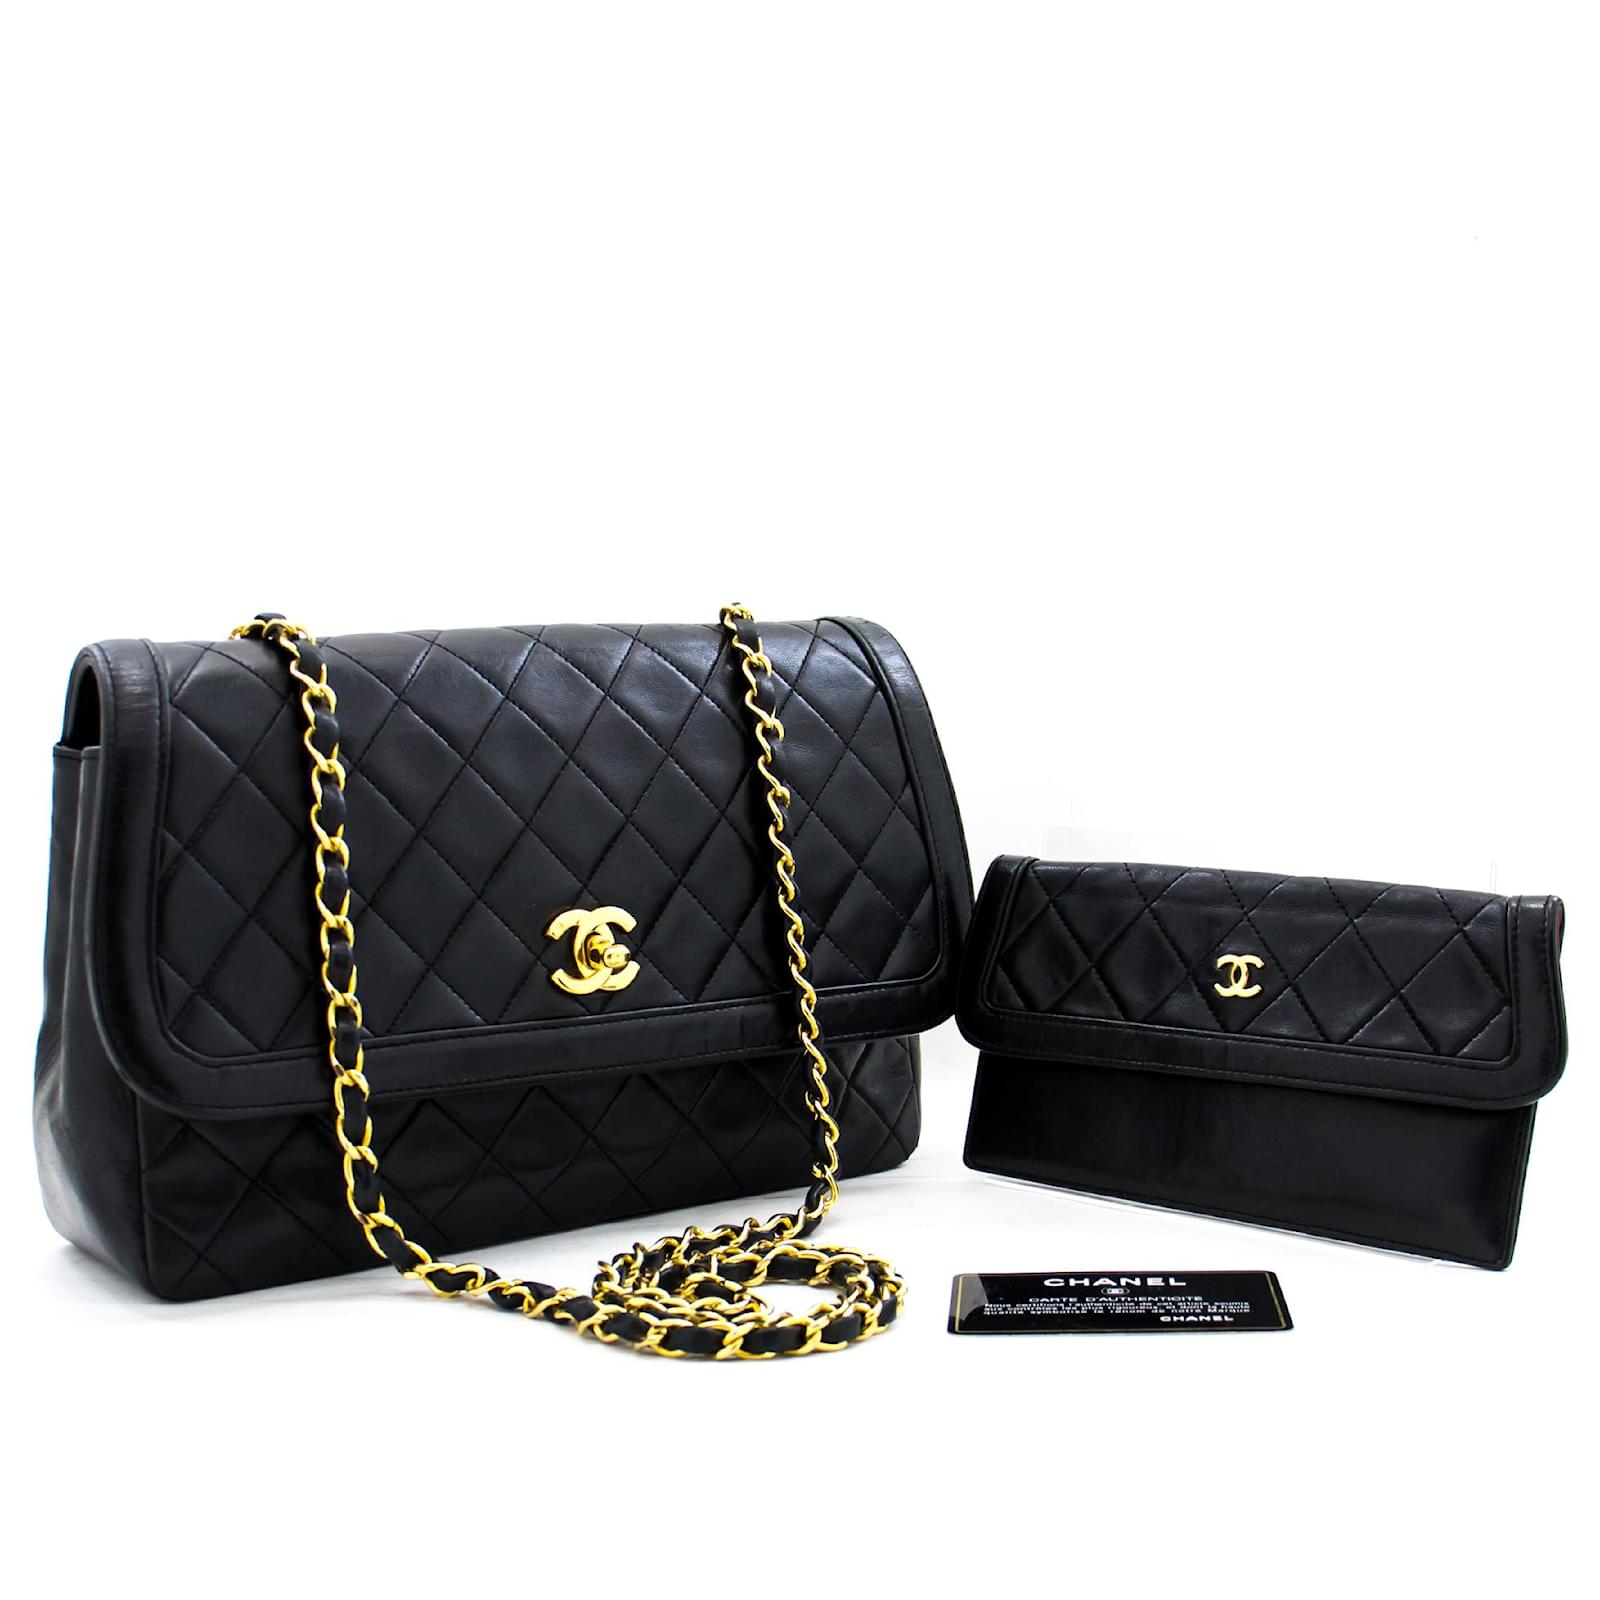 Auth CHANEL Double Flap Black Quilted Leather Gold Chain Shoulder Bag #48323